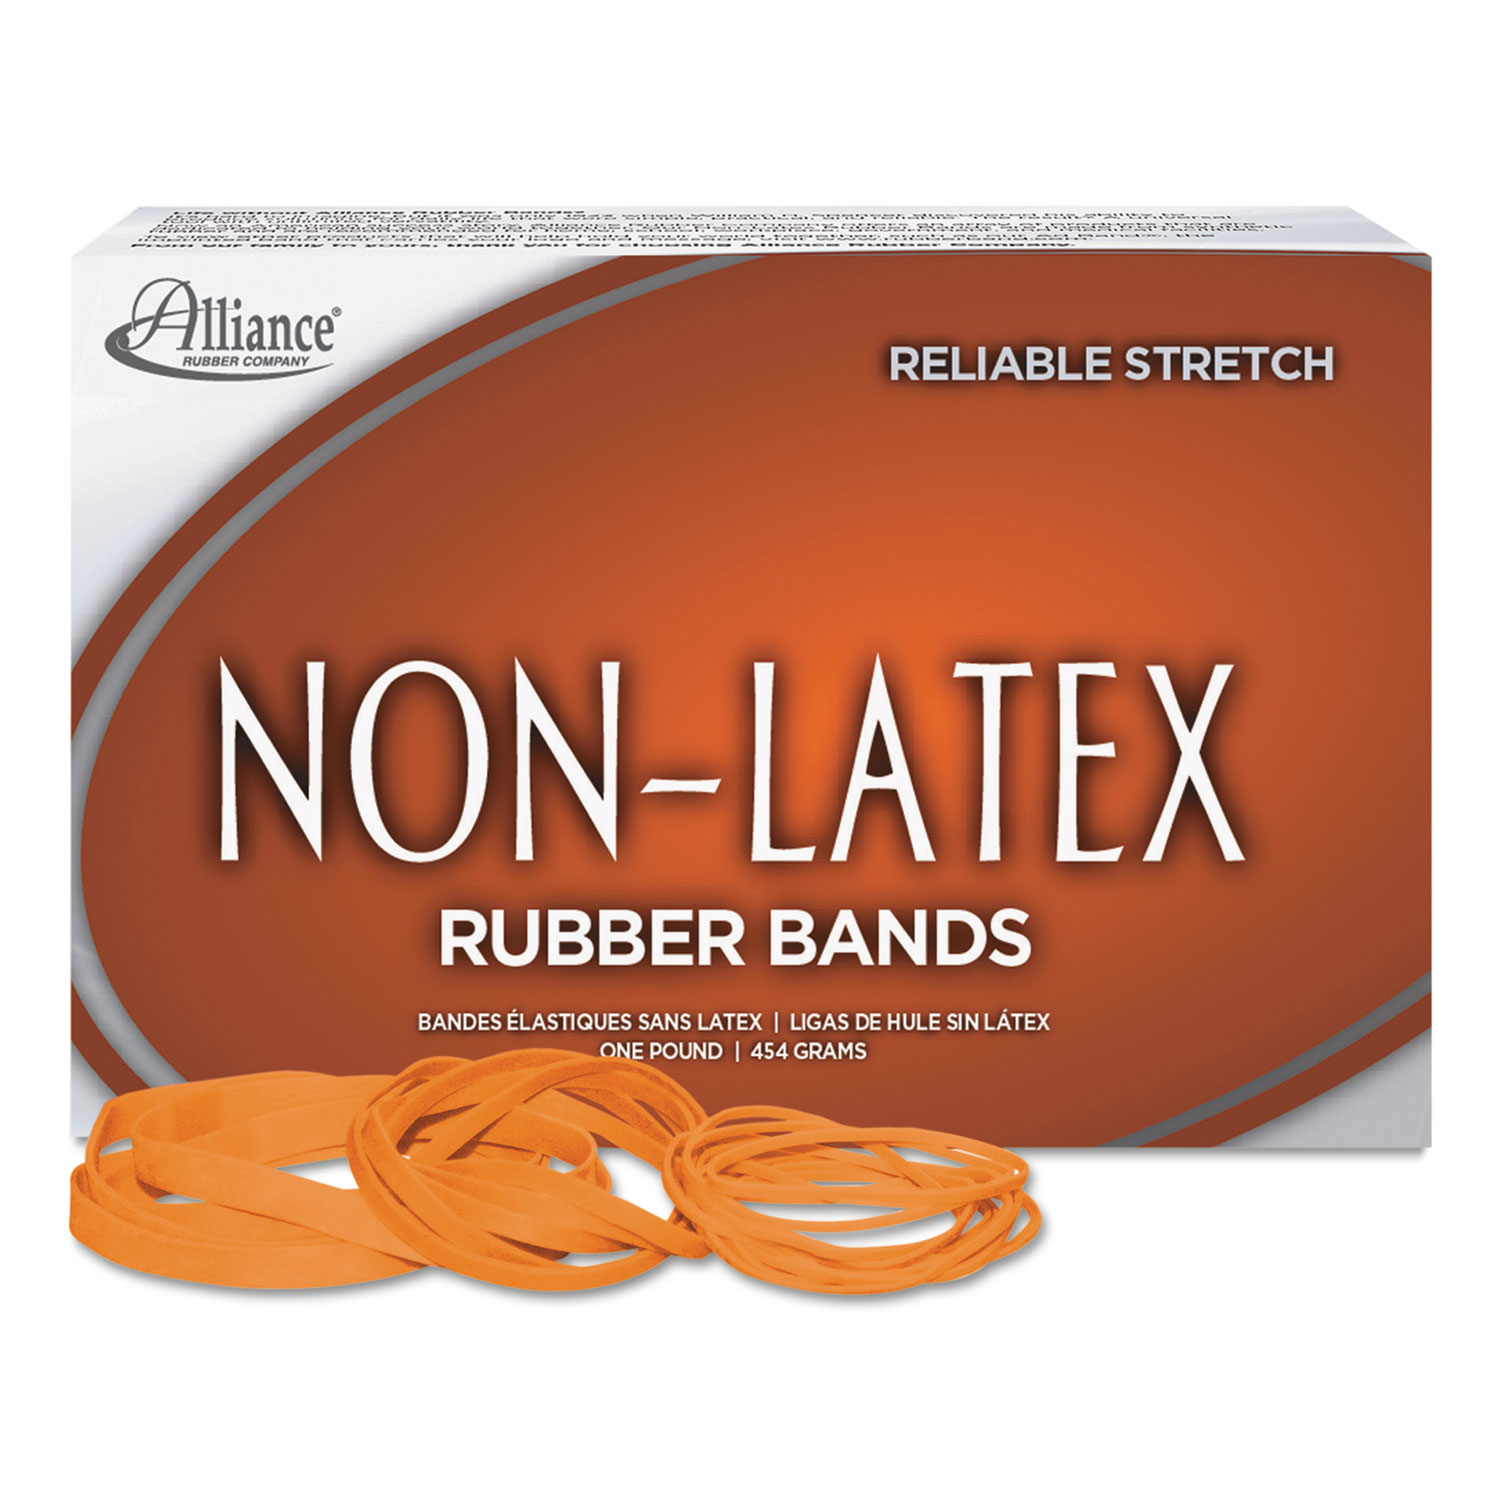  Alliance 37546 Non-Latex Rubber Bands, Size 54 (Assorted), 0.04 Gauge, Orange, 1 lb Box (ALL37546) 